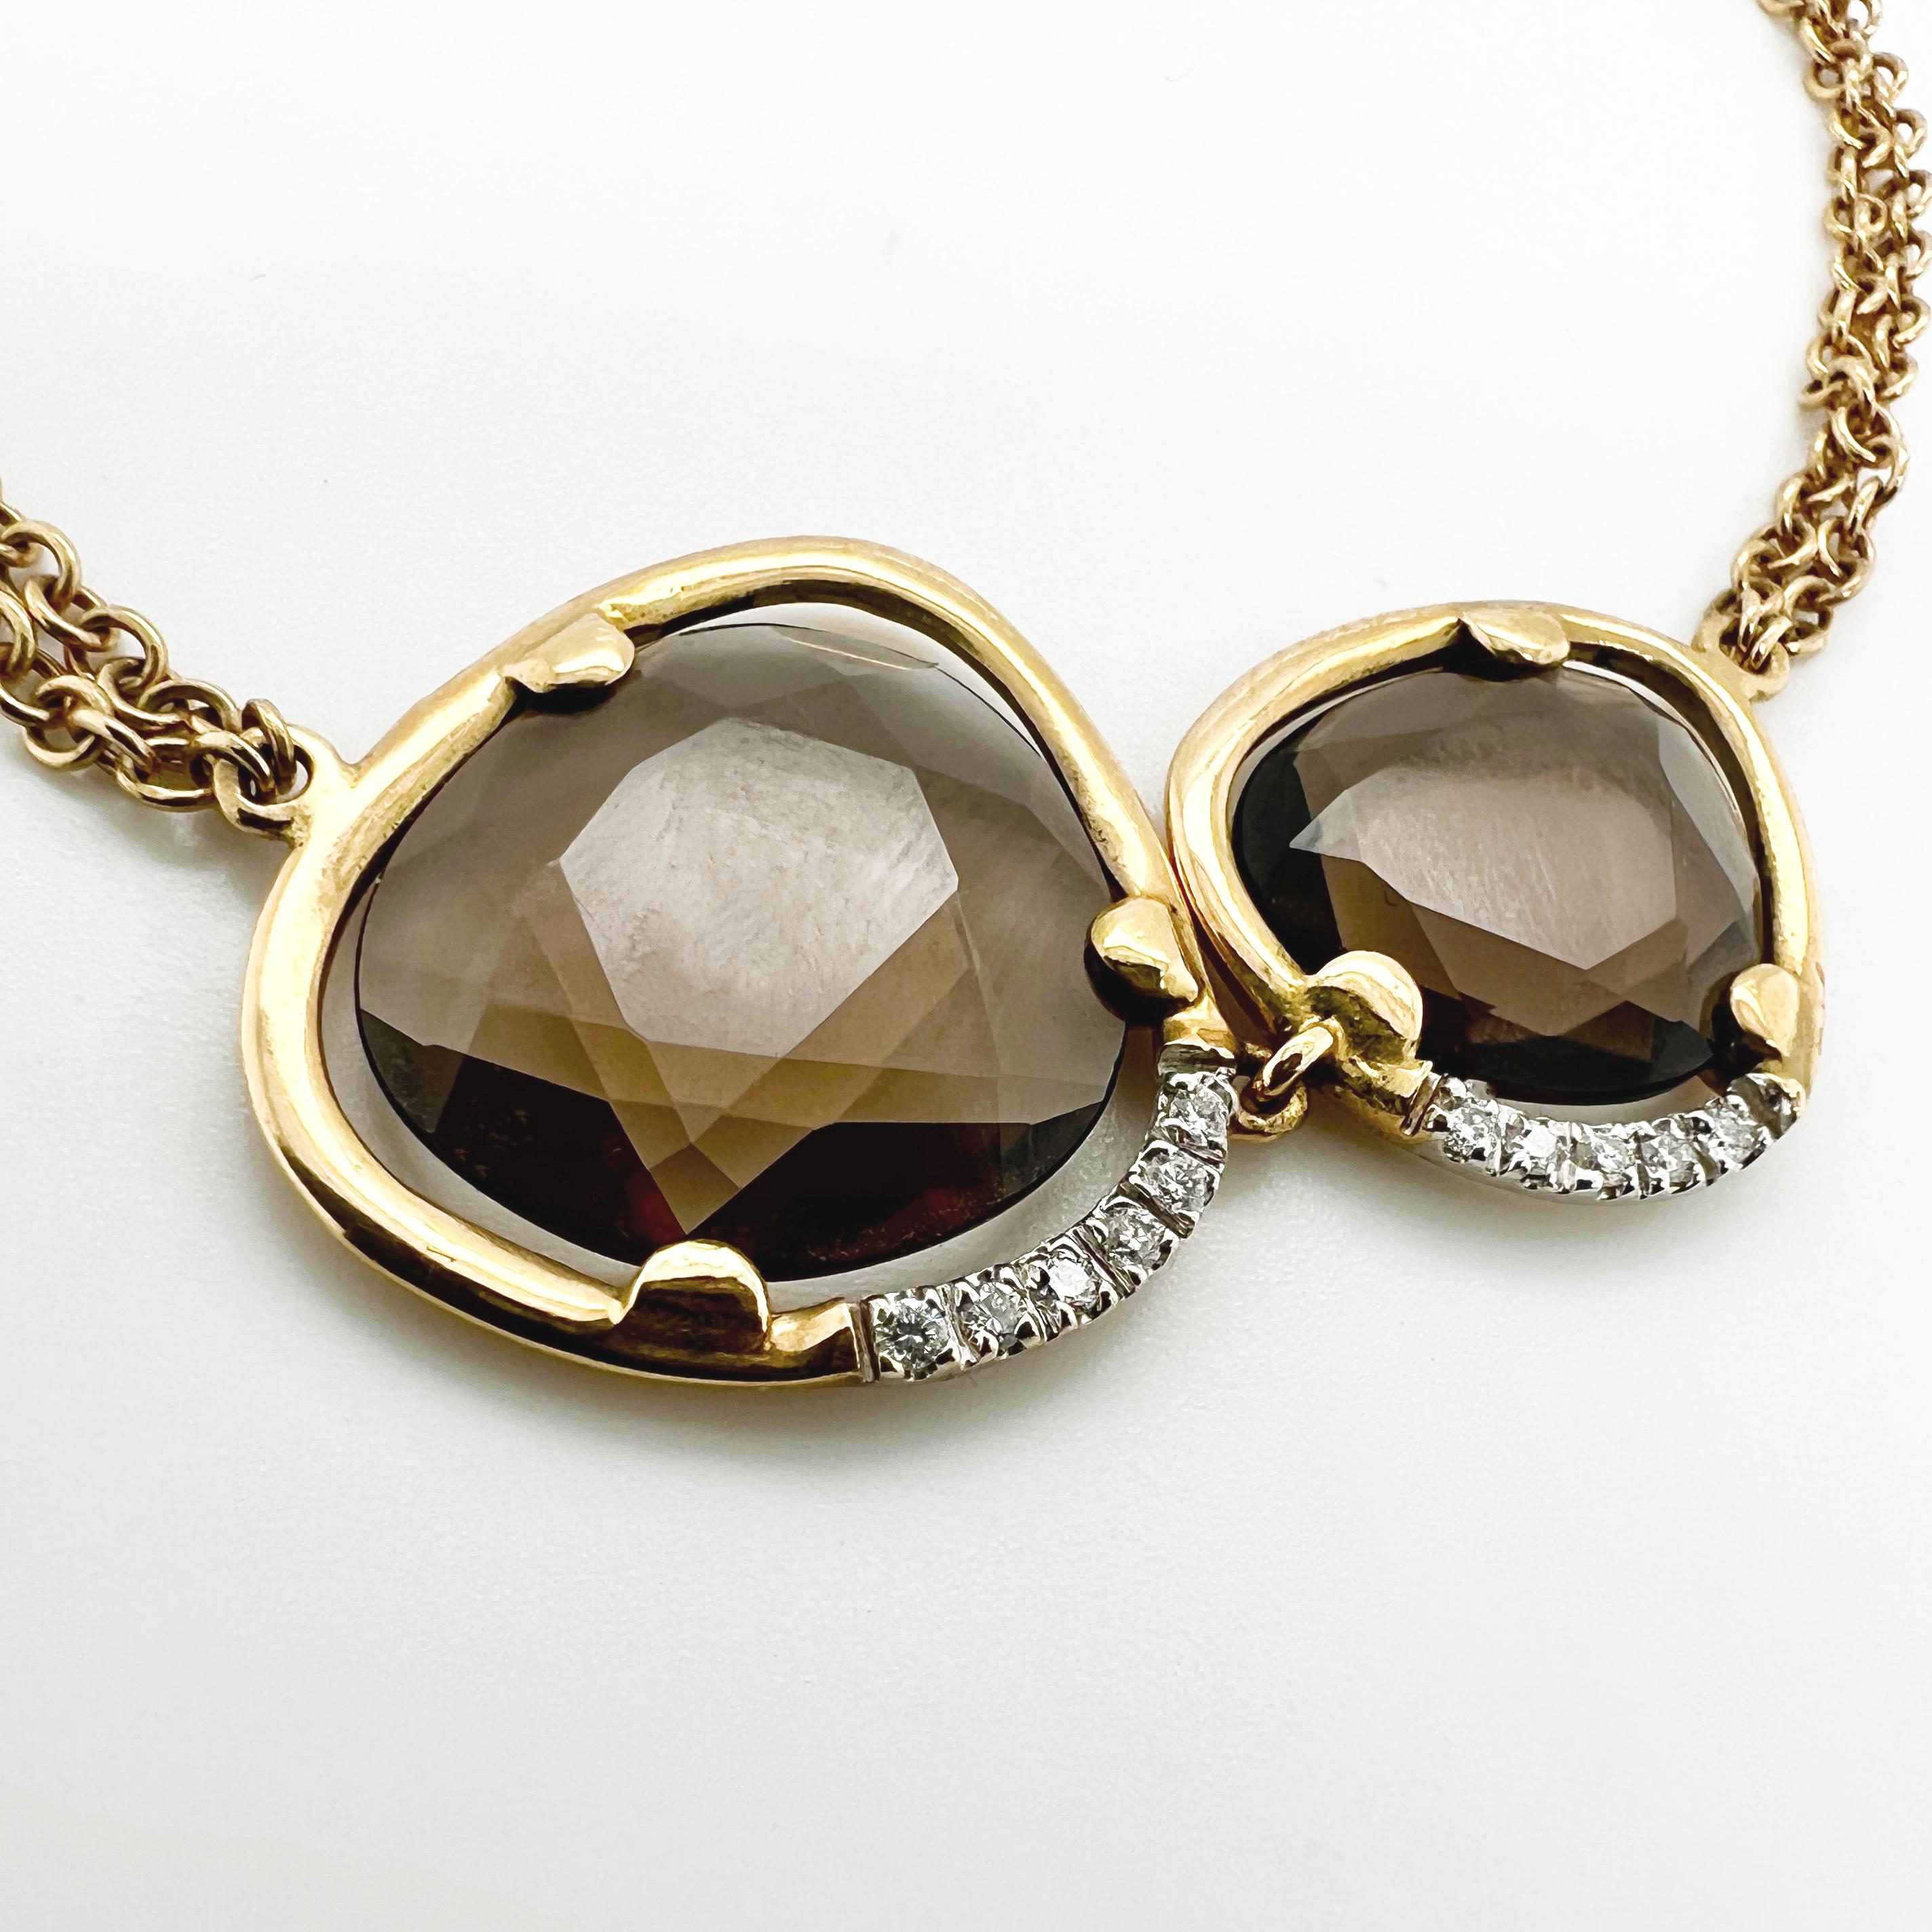 All of our jewellery is made by Italian Artisans to guarantee the Made In Italy manufacturing. 

The 18Kt Yellow Gold Chain Bracelet with Smoky Quartz faceted gems and Diamonds is a beautiful and unique piece of jewelry. Yellow gold has a classic